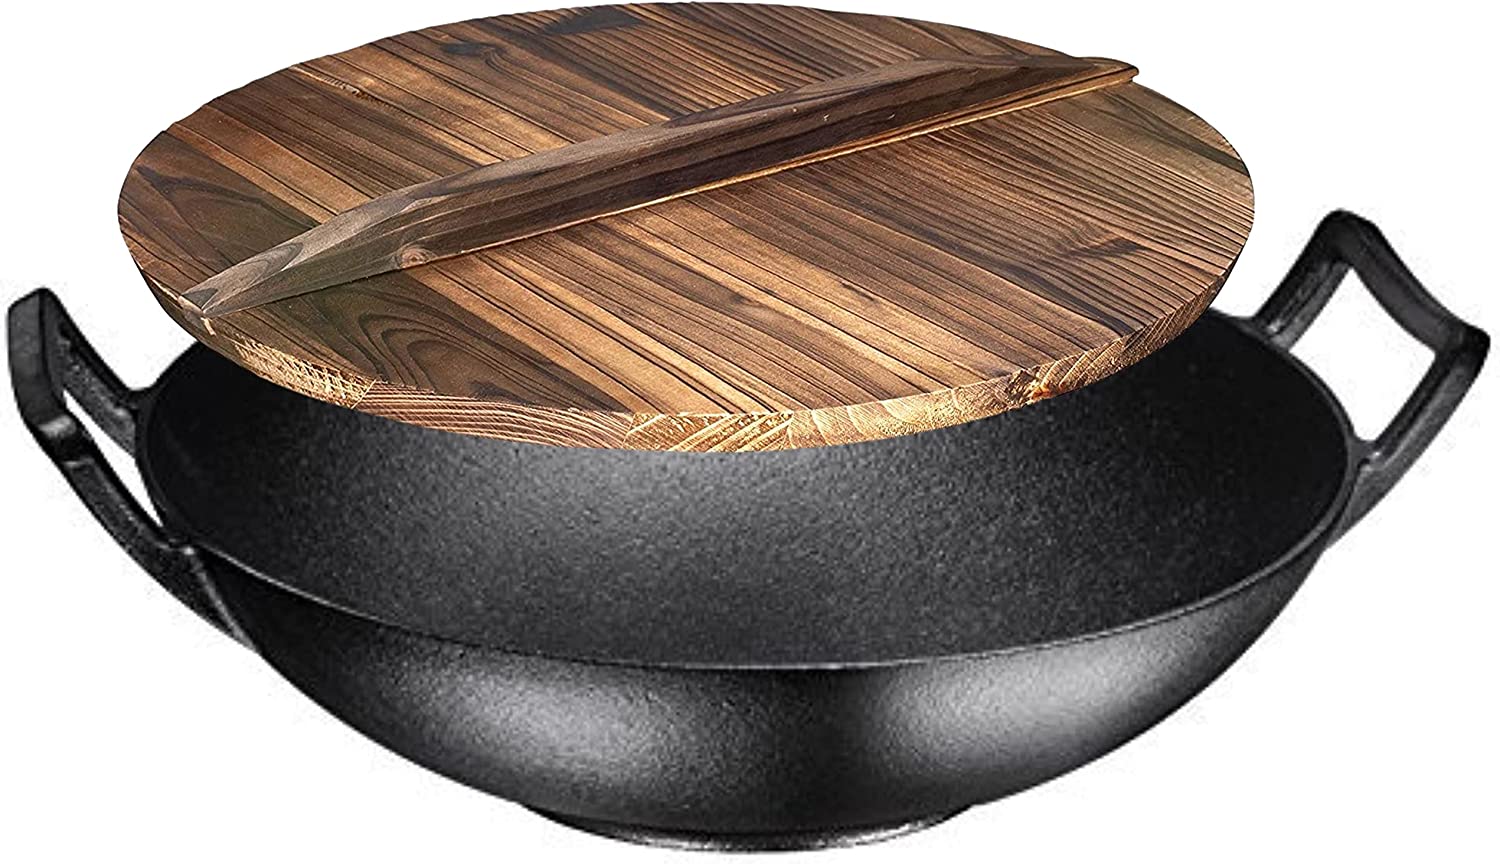 Klee Pre-Seasoned Cast Iron Wok with 2 Handles and Wooden Wok Lid 14-inch